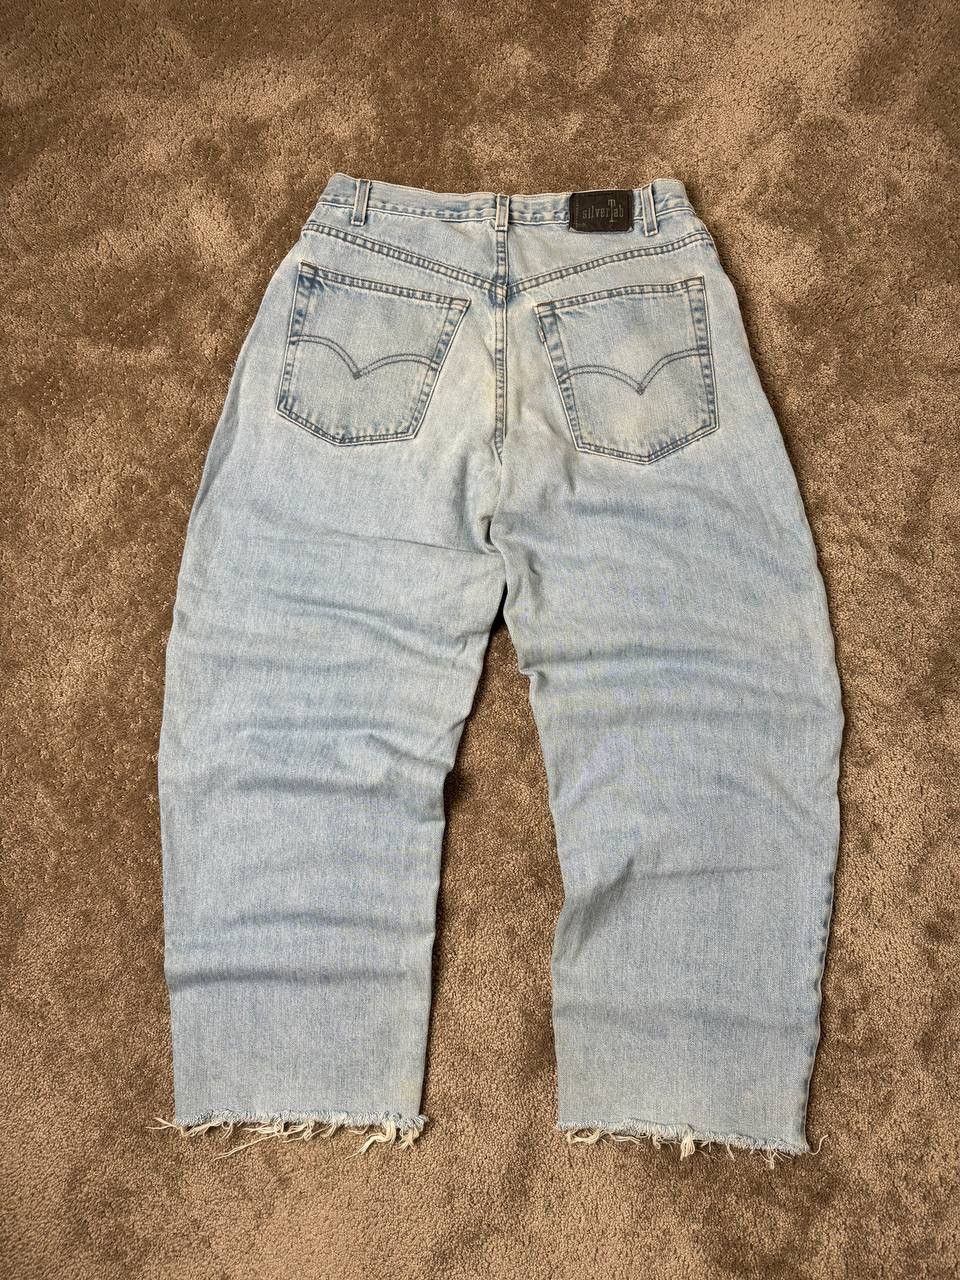 Vintage Vintage man's RARE Levi's Silver Tab BAGGY American style | Grailed